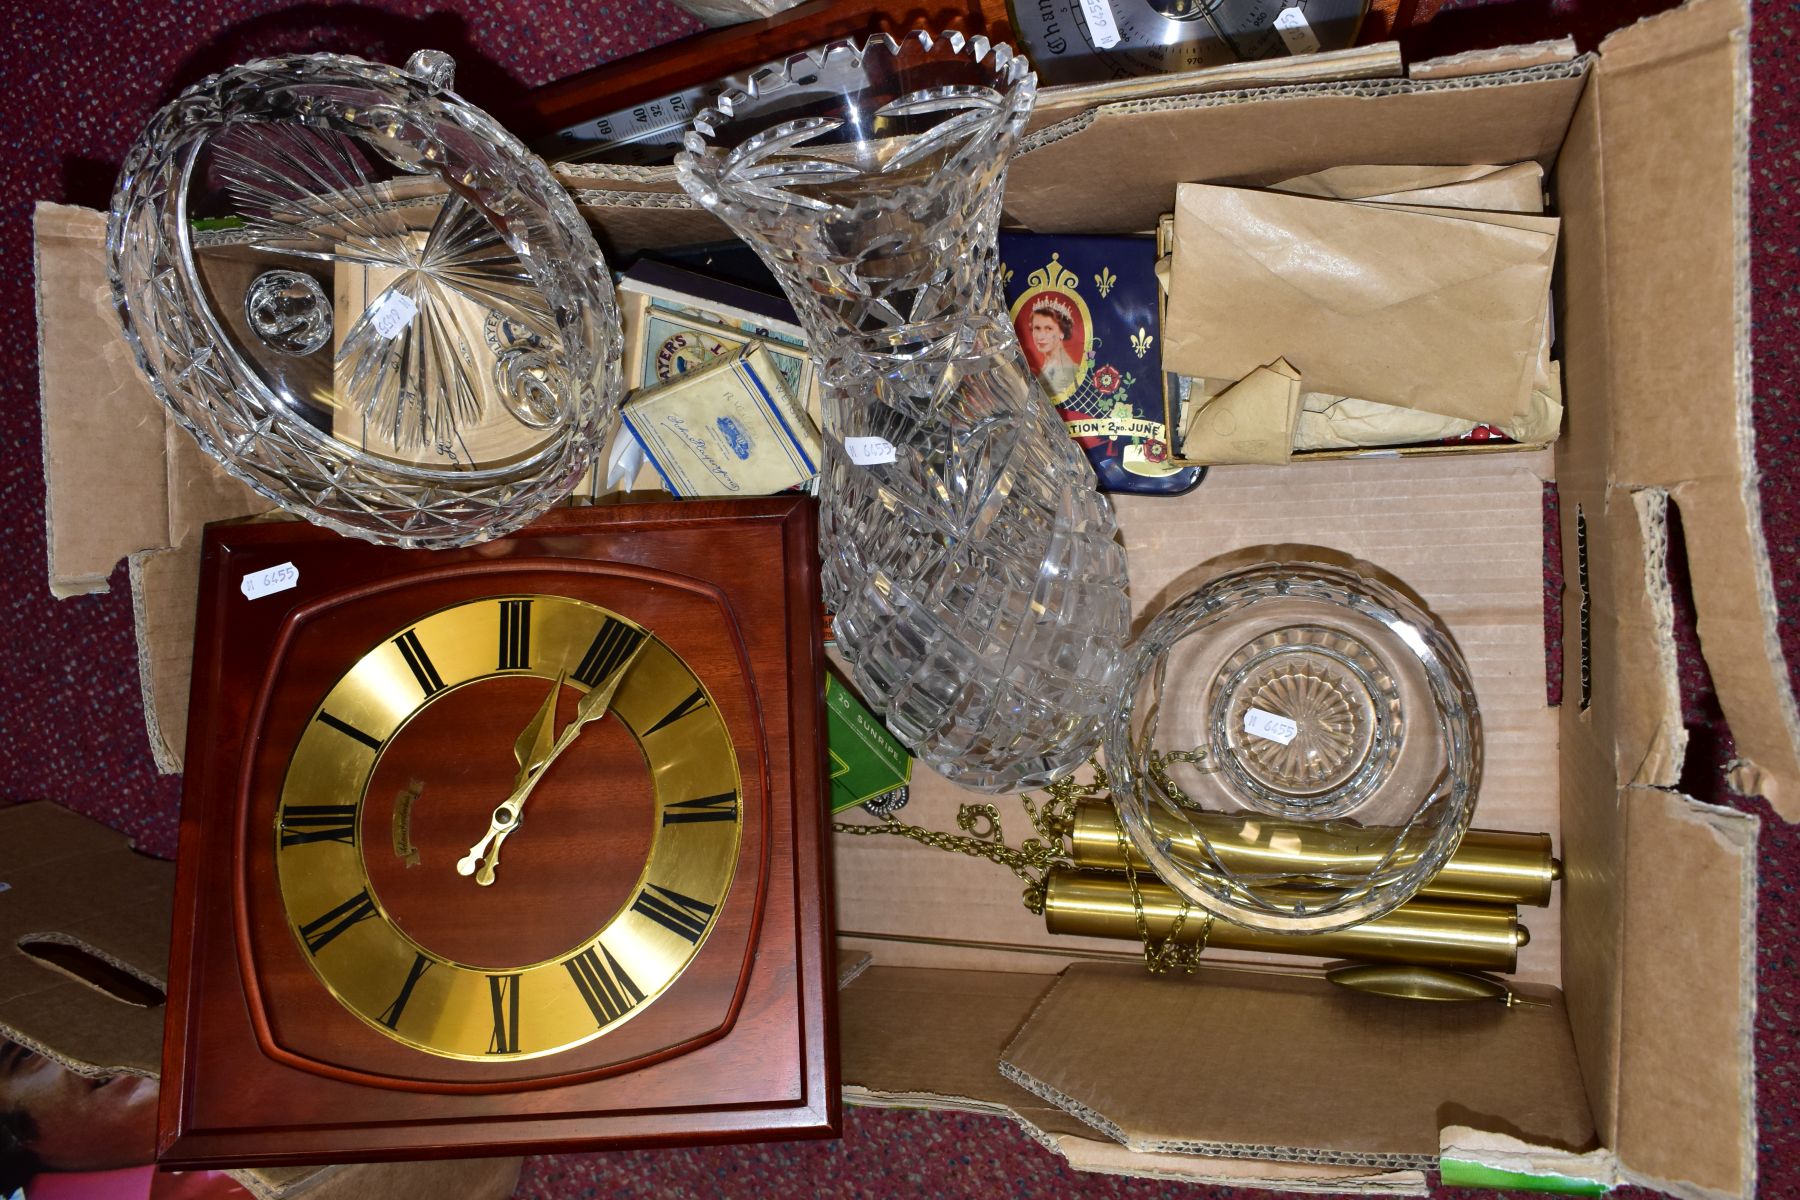 A BOX OF GLASSWARES, CIGARETTE CARDS, VINTAGE CIGARETTE PACKETS, A WALL CLOCK, A BAROMETER AND - Image 6 of 6